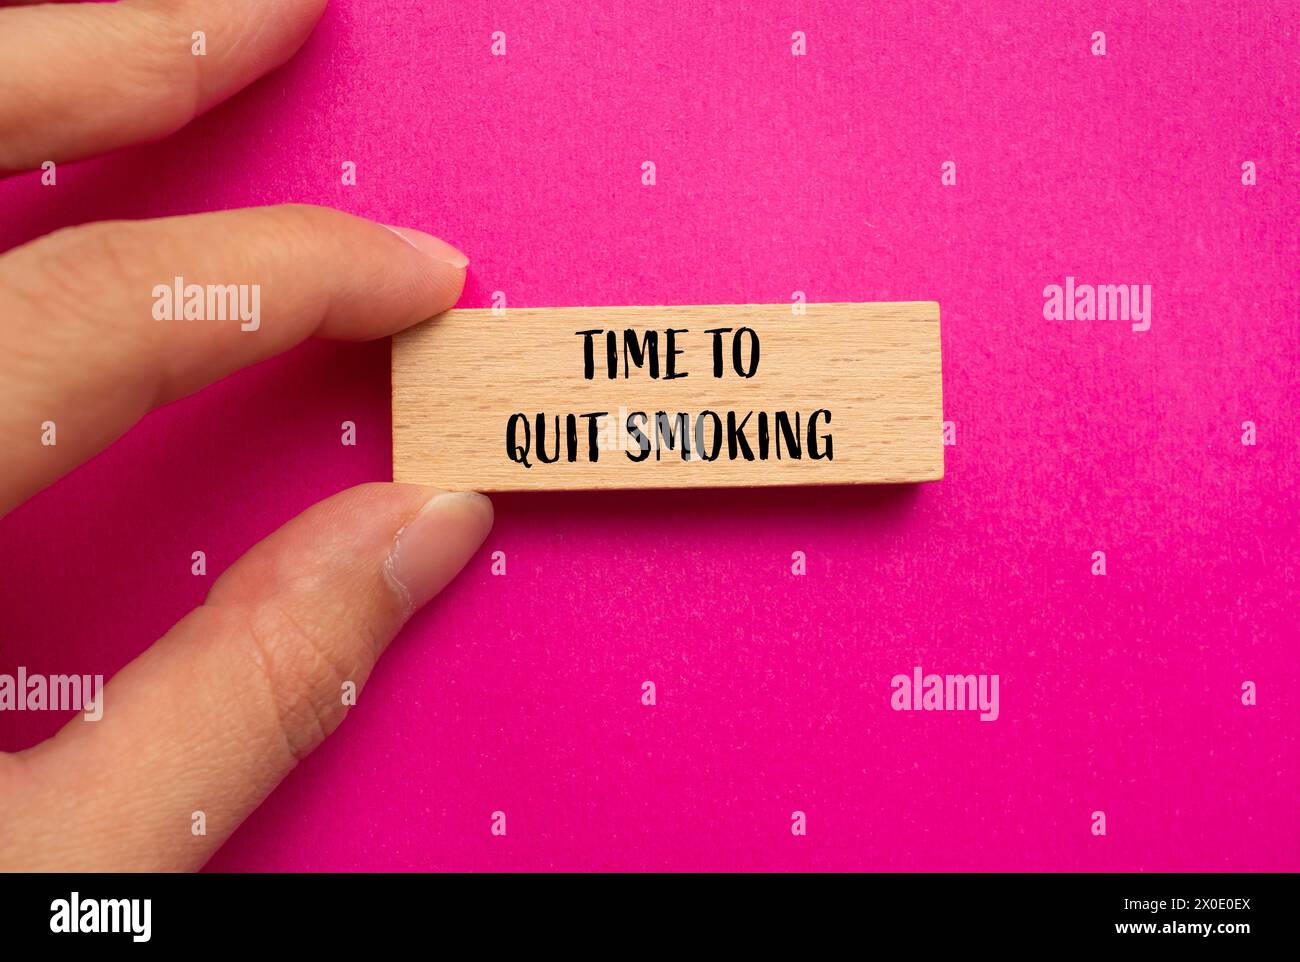 Time to quit smoking words written on wooden block with pink background. Conceptual time to quit smoking symbol. Copy space. Stock Photo